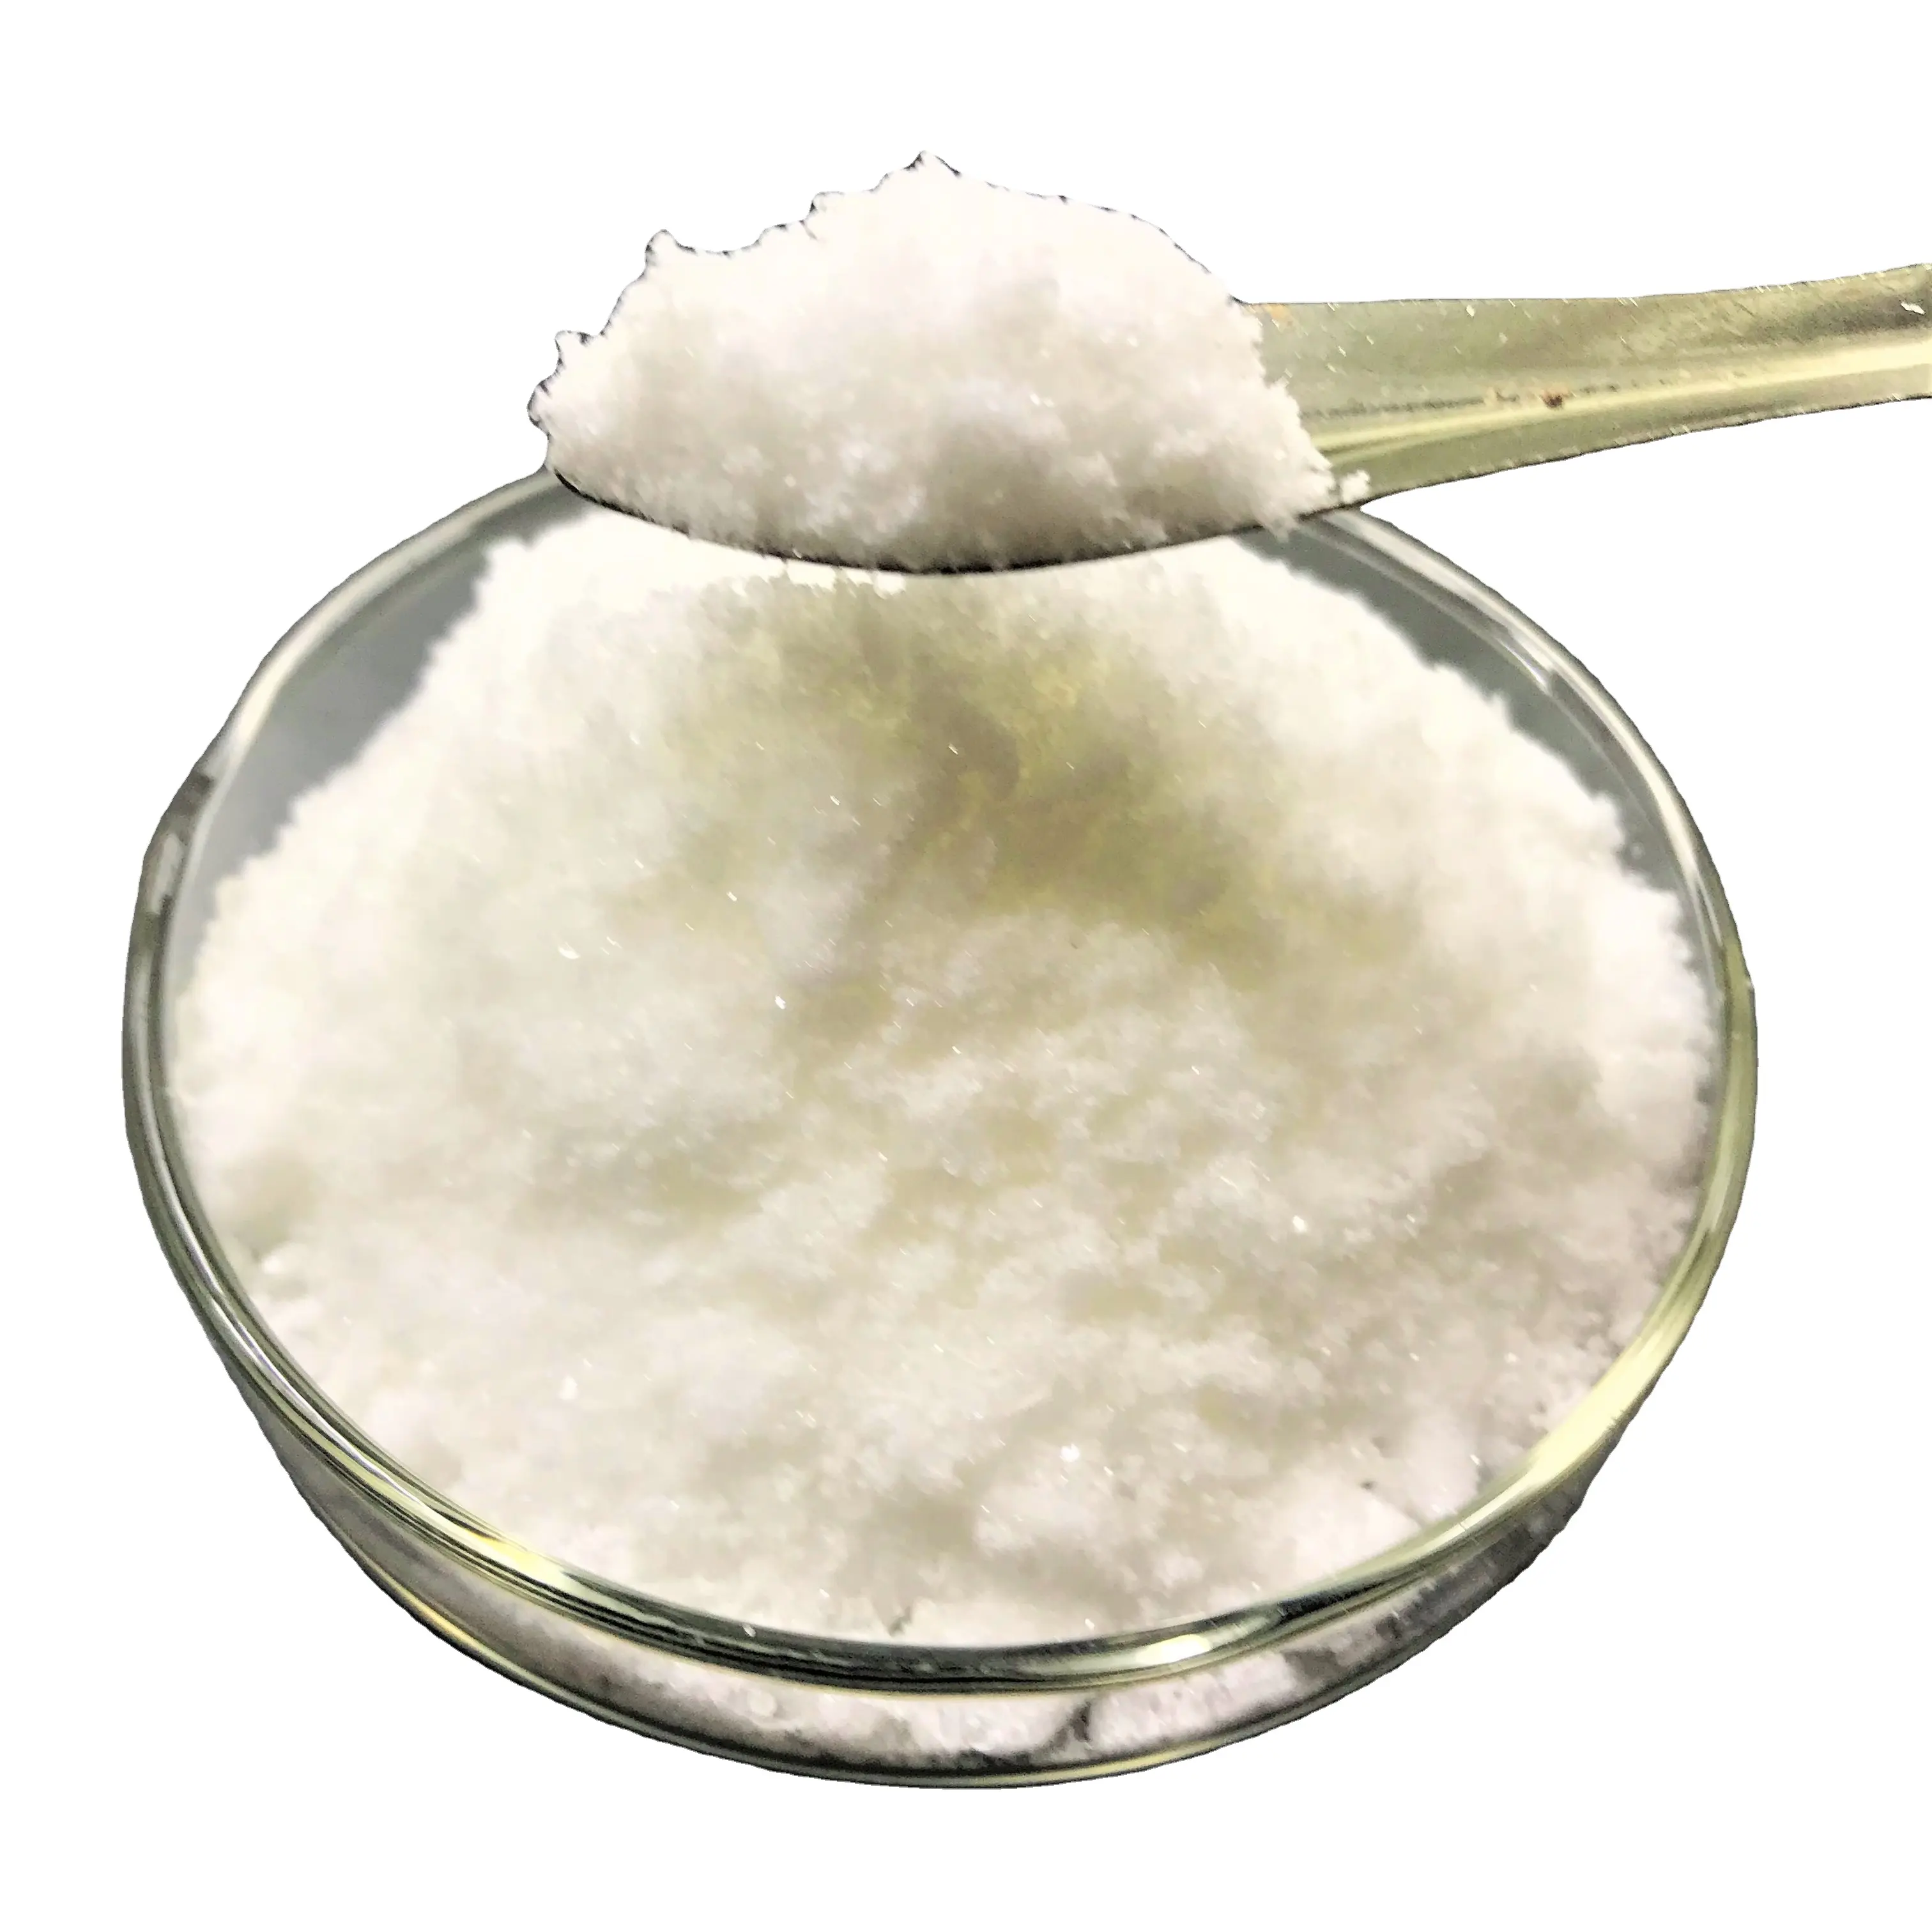 1 4-Dioxaspiro[4.5]decan-8-one CAS 4746-97-8 High purity  Factory direct sale